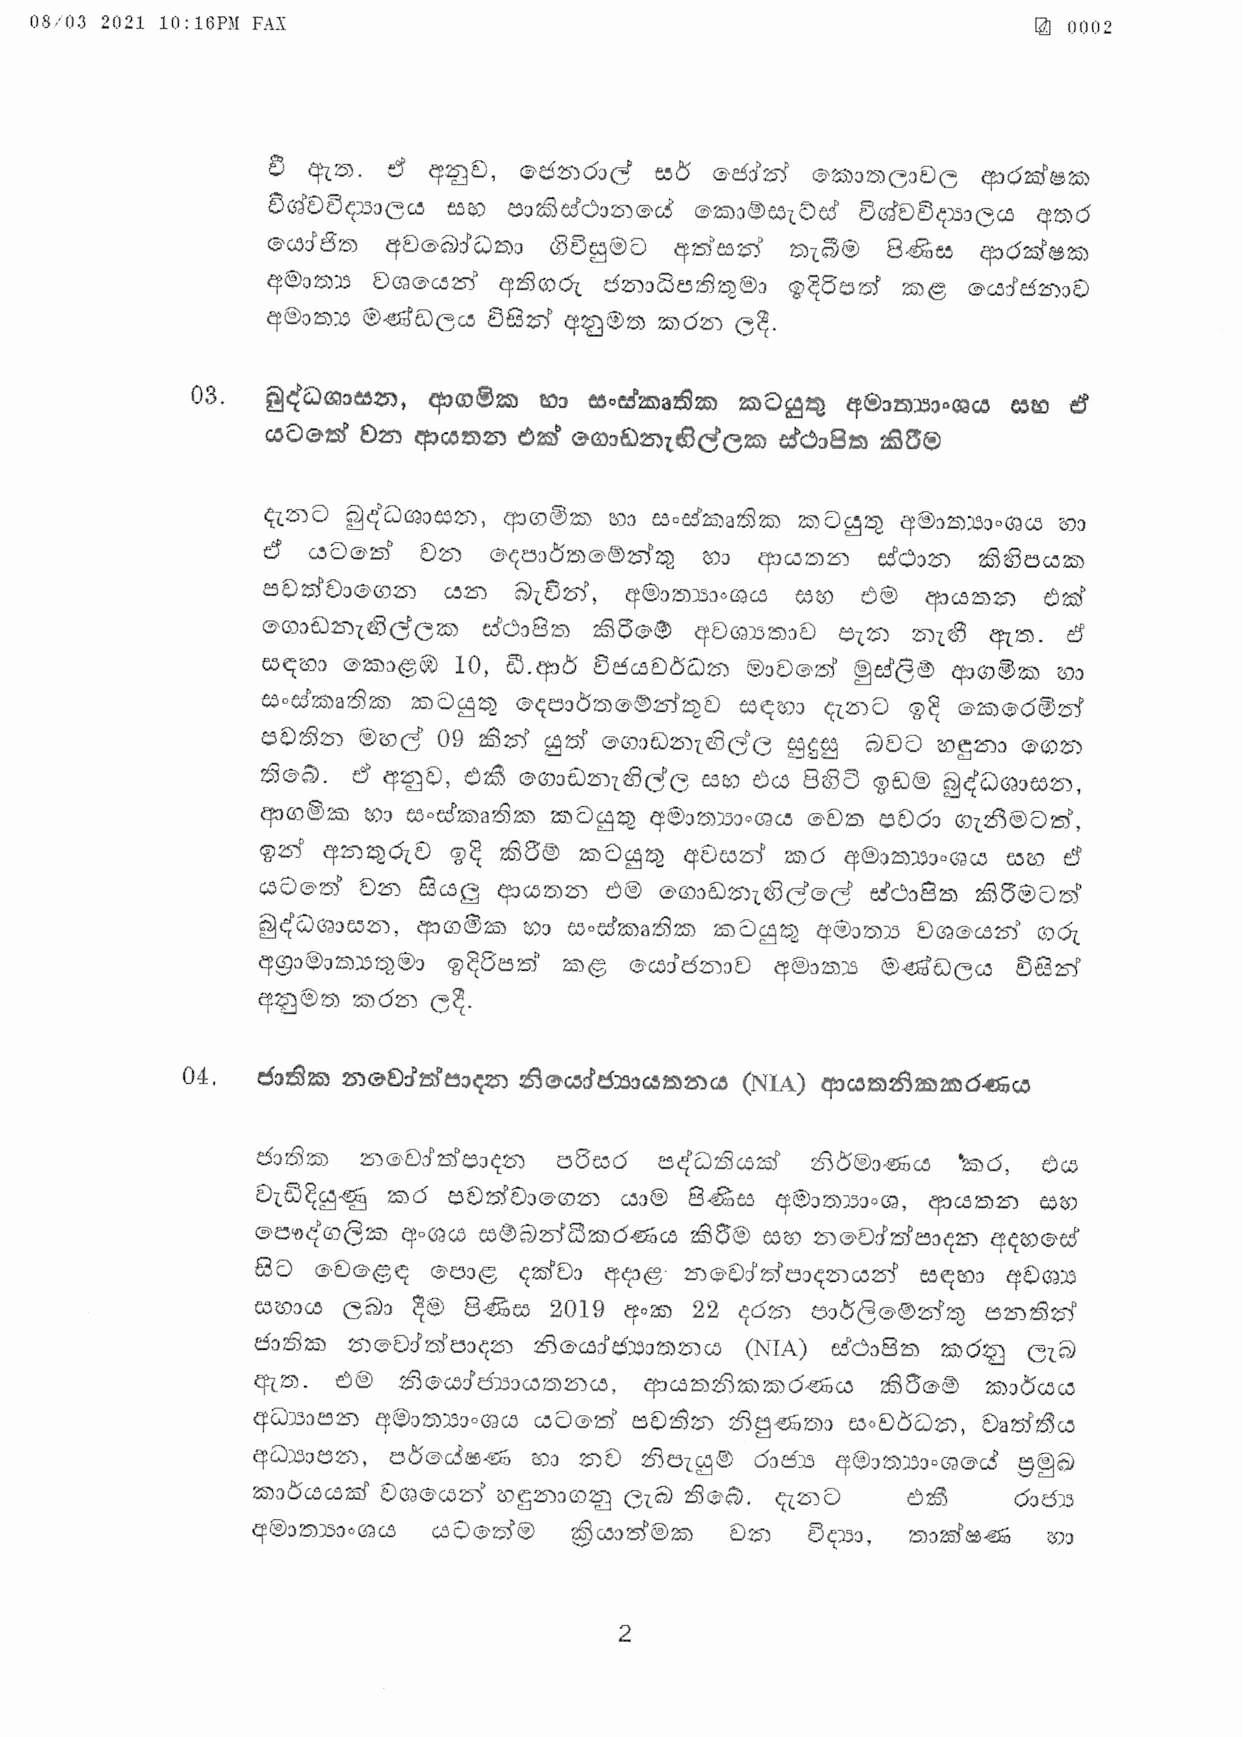 Cabinet Decision on 08.03.2021 compressed page 002